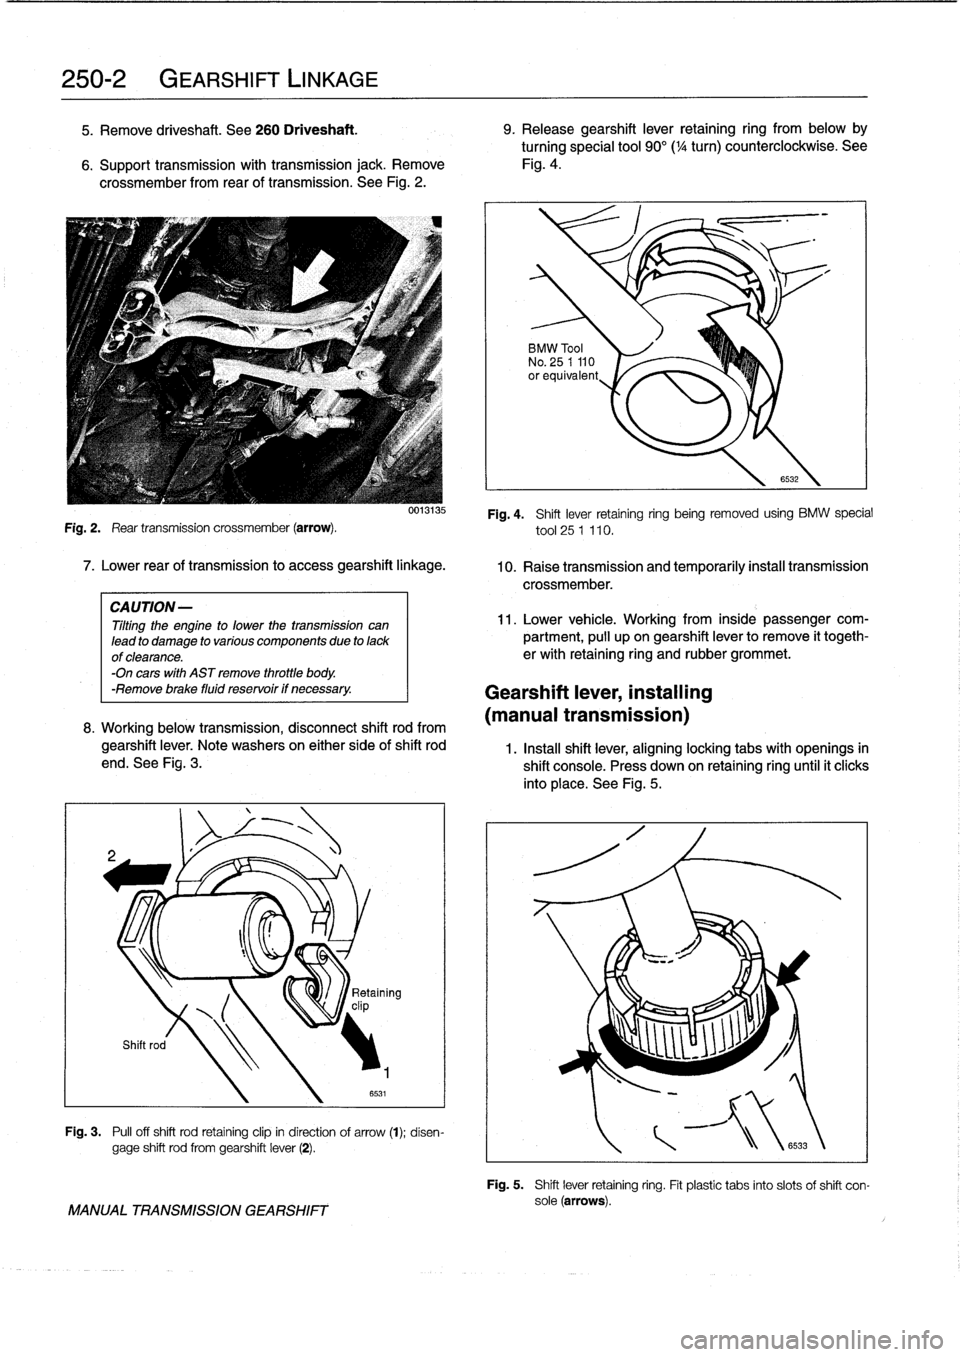 BMW 318i 1994 E36 Service Manual 
250-2

	

GEARSHIFT
LINKAGE

5
.
Remove
driveshaft
.
See260
Driveshaft
.

	

9
.
Release
gearshift
lever
retaining
ring
from
below
by

turningspecial
tool
90°(
1
/4
turn)
counterclockwise
.
See

6
.